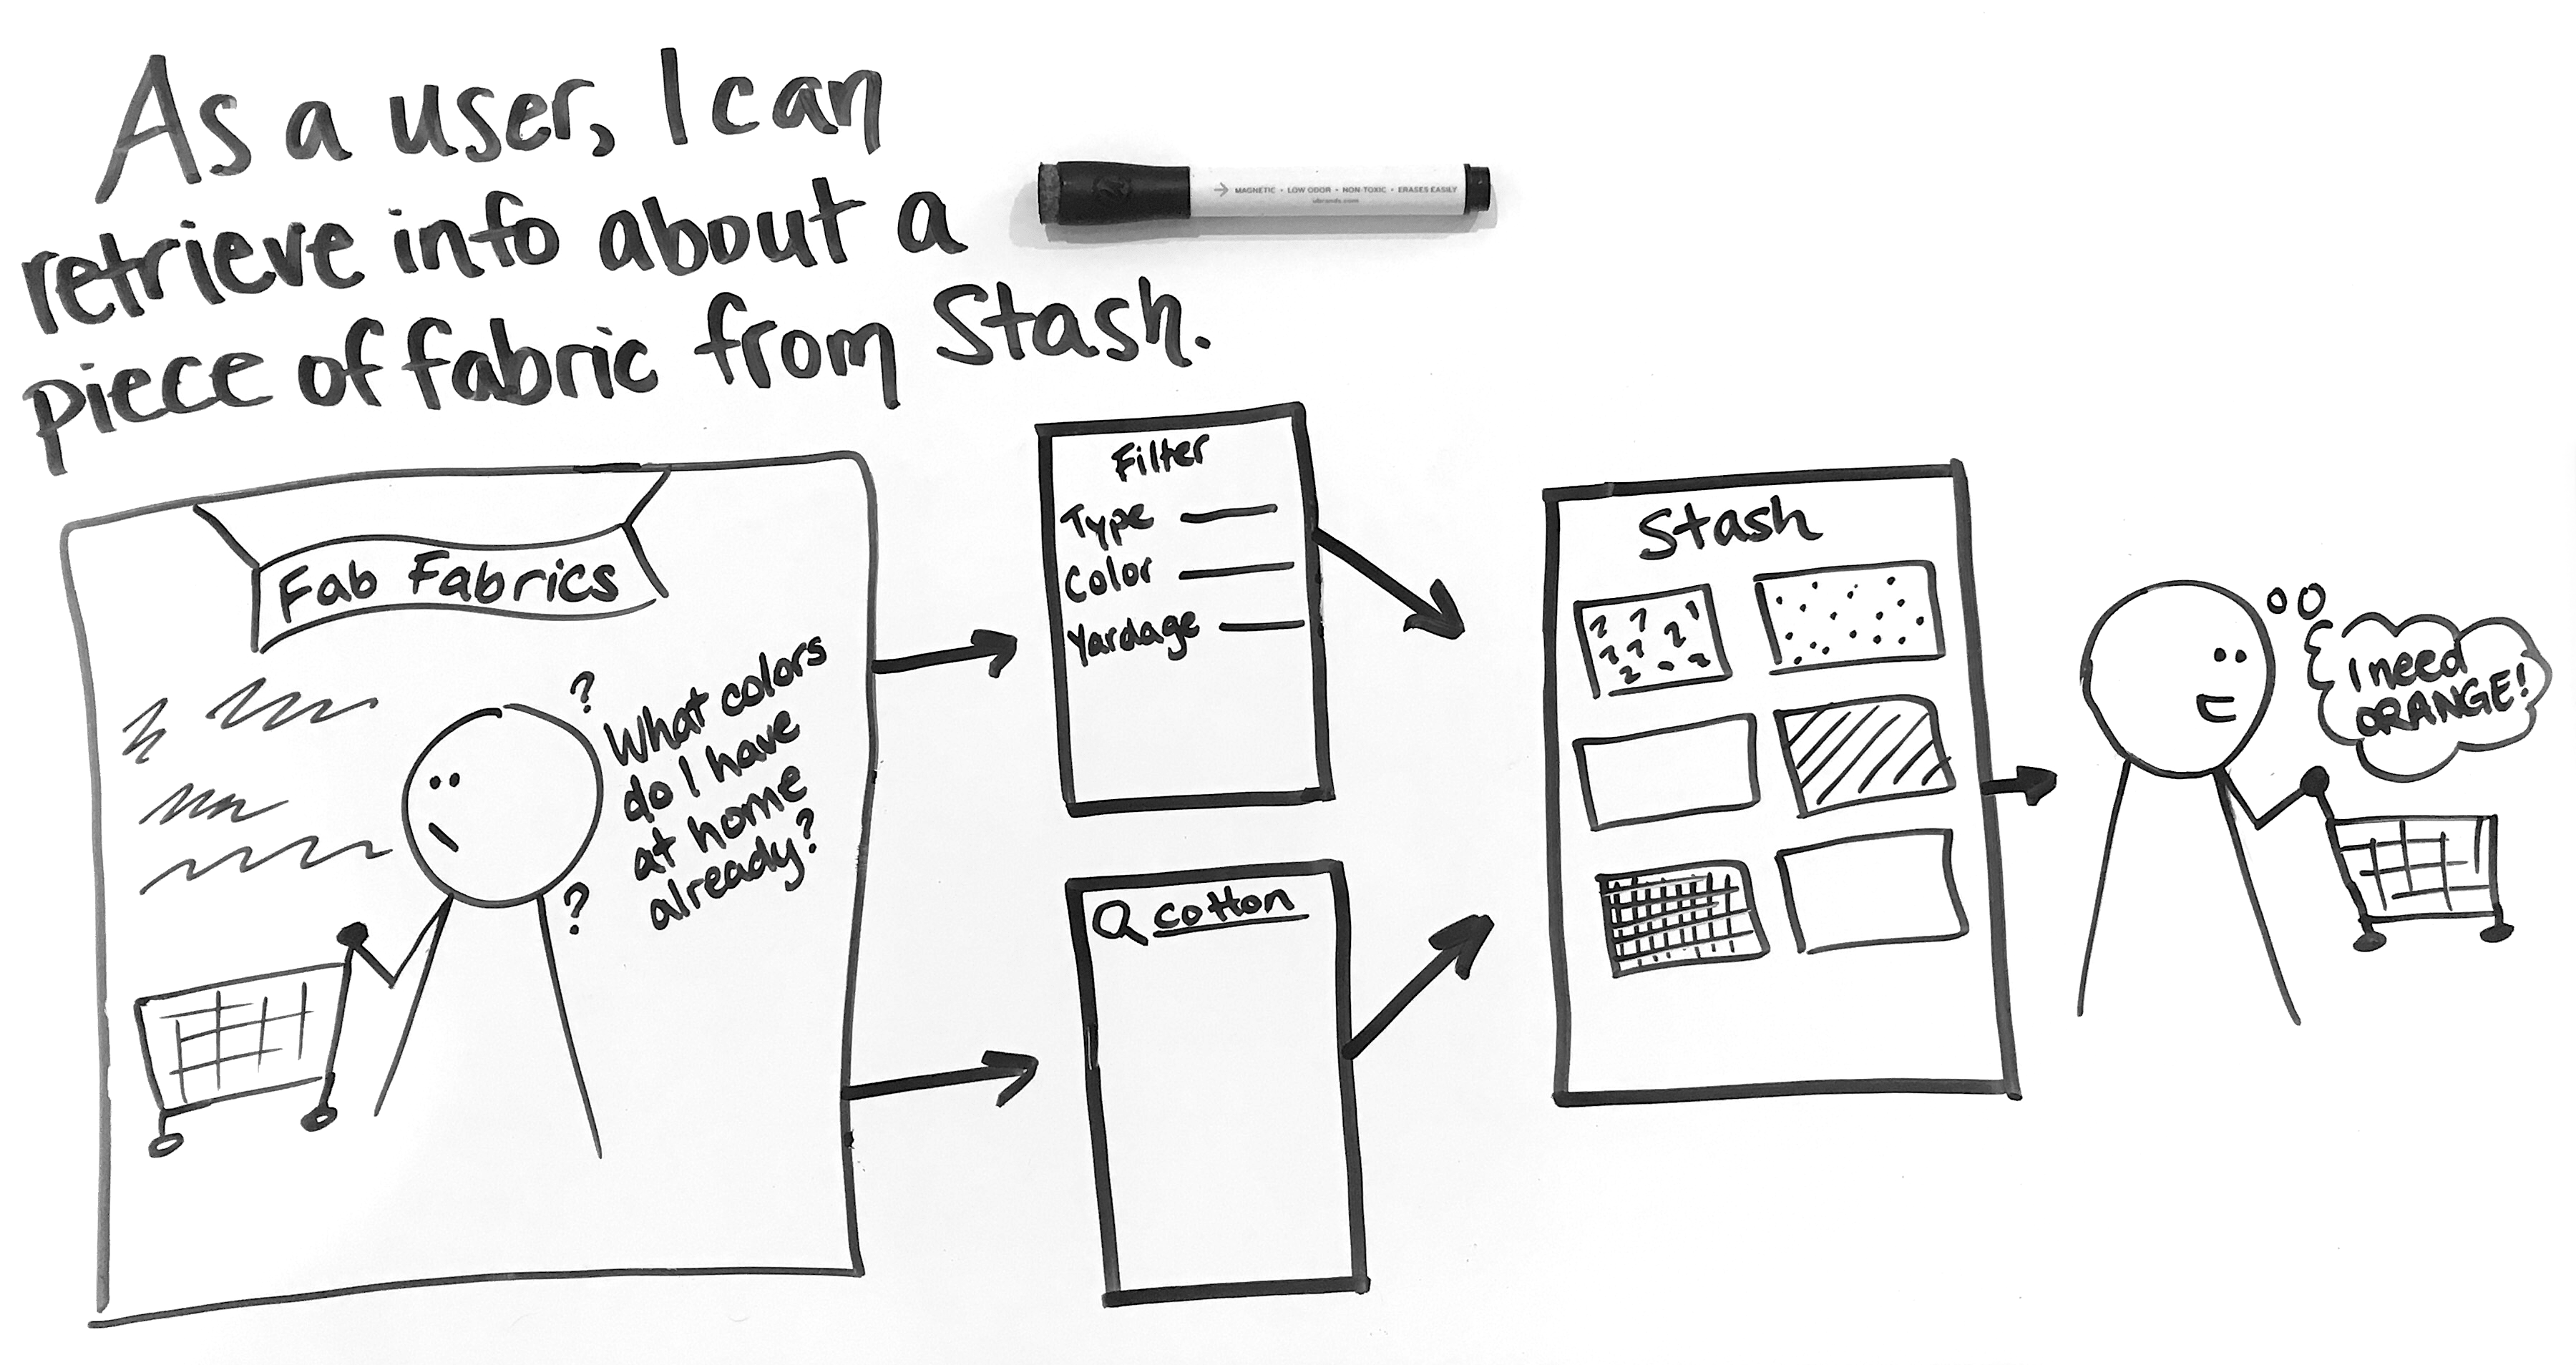 Figure 1.03 is a user story sketch showing a user retrieving details about a fabric from the Stash app